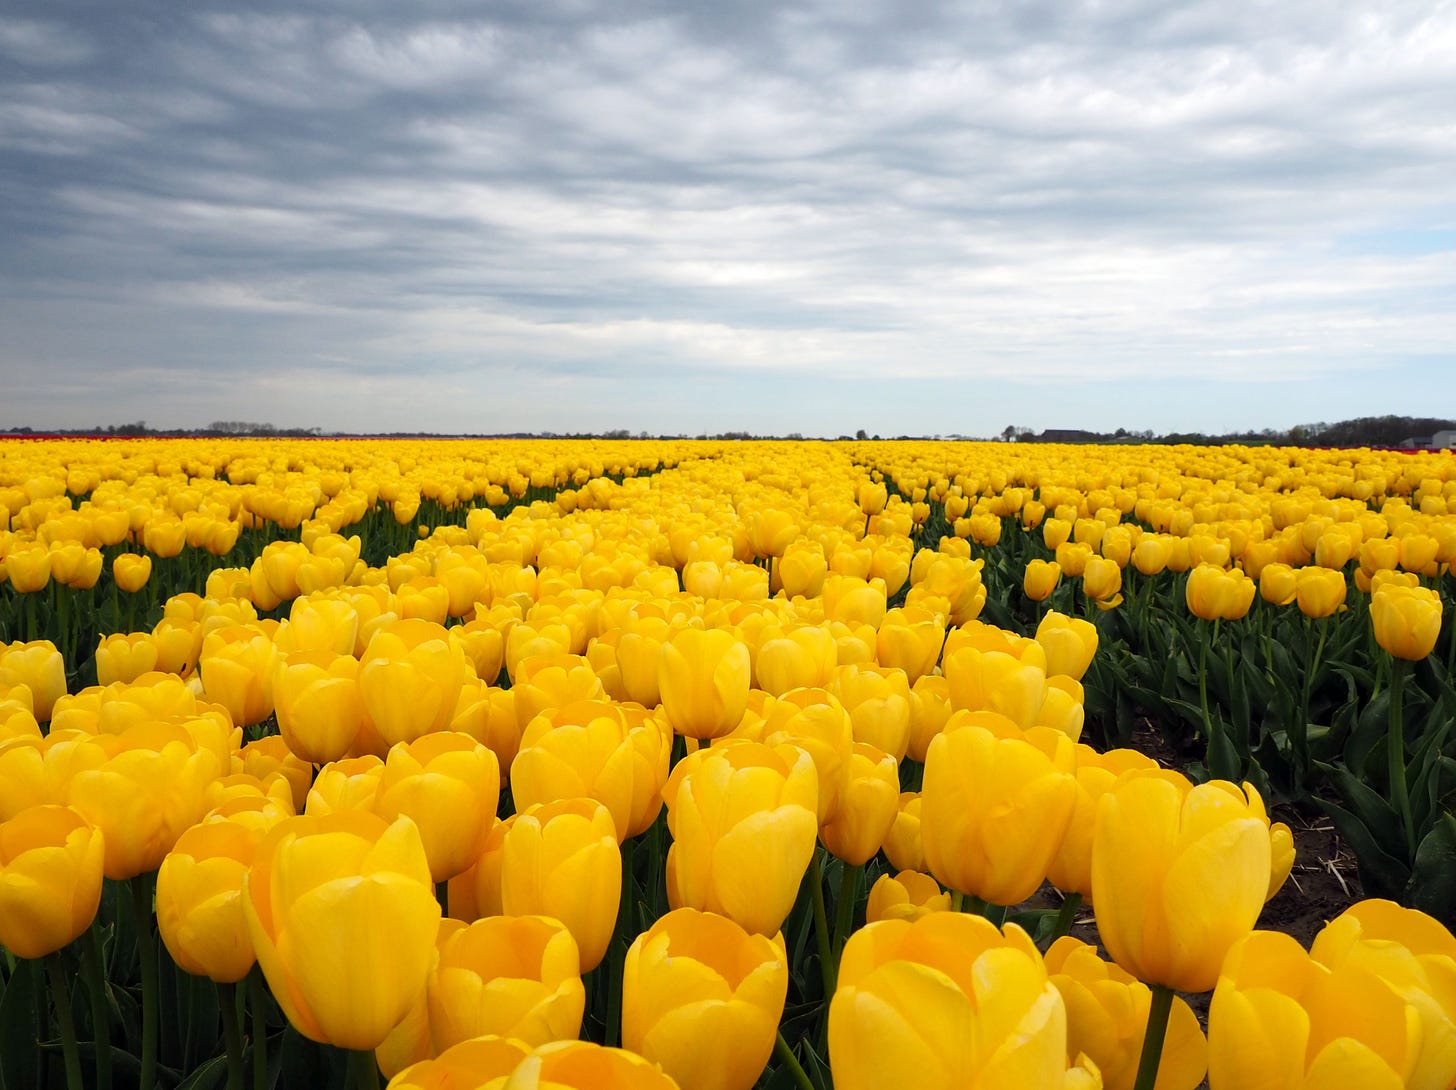 A field of bright yellow tulips reaching to the horizon under a grey cloudy sky.